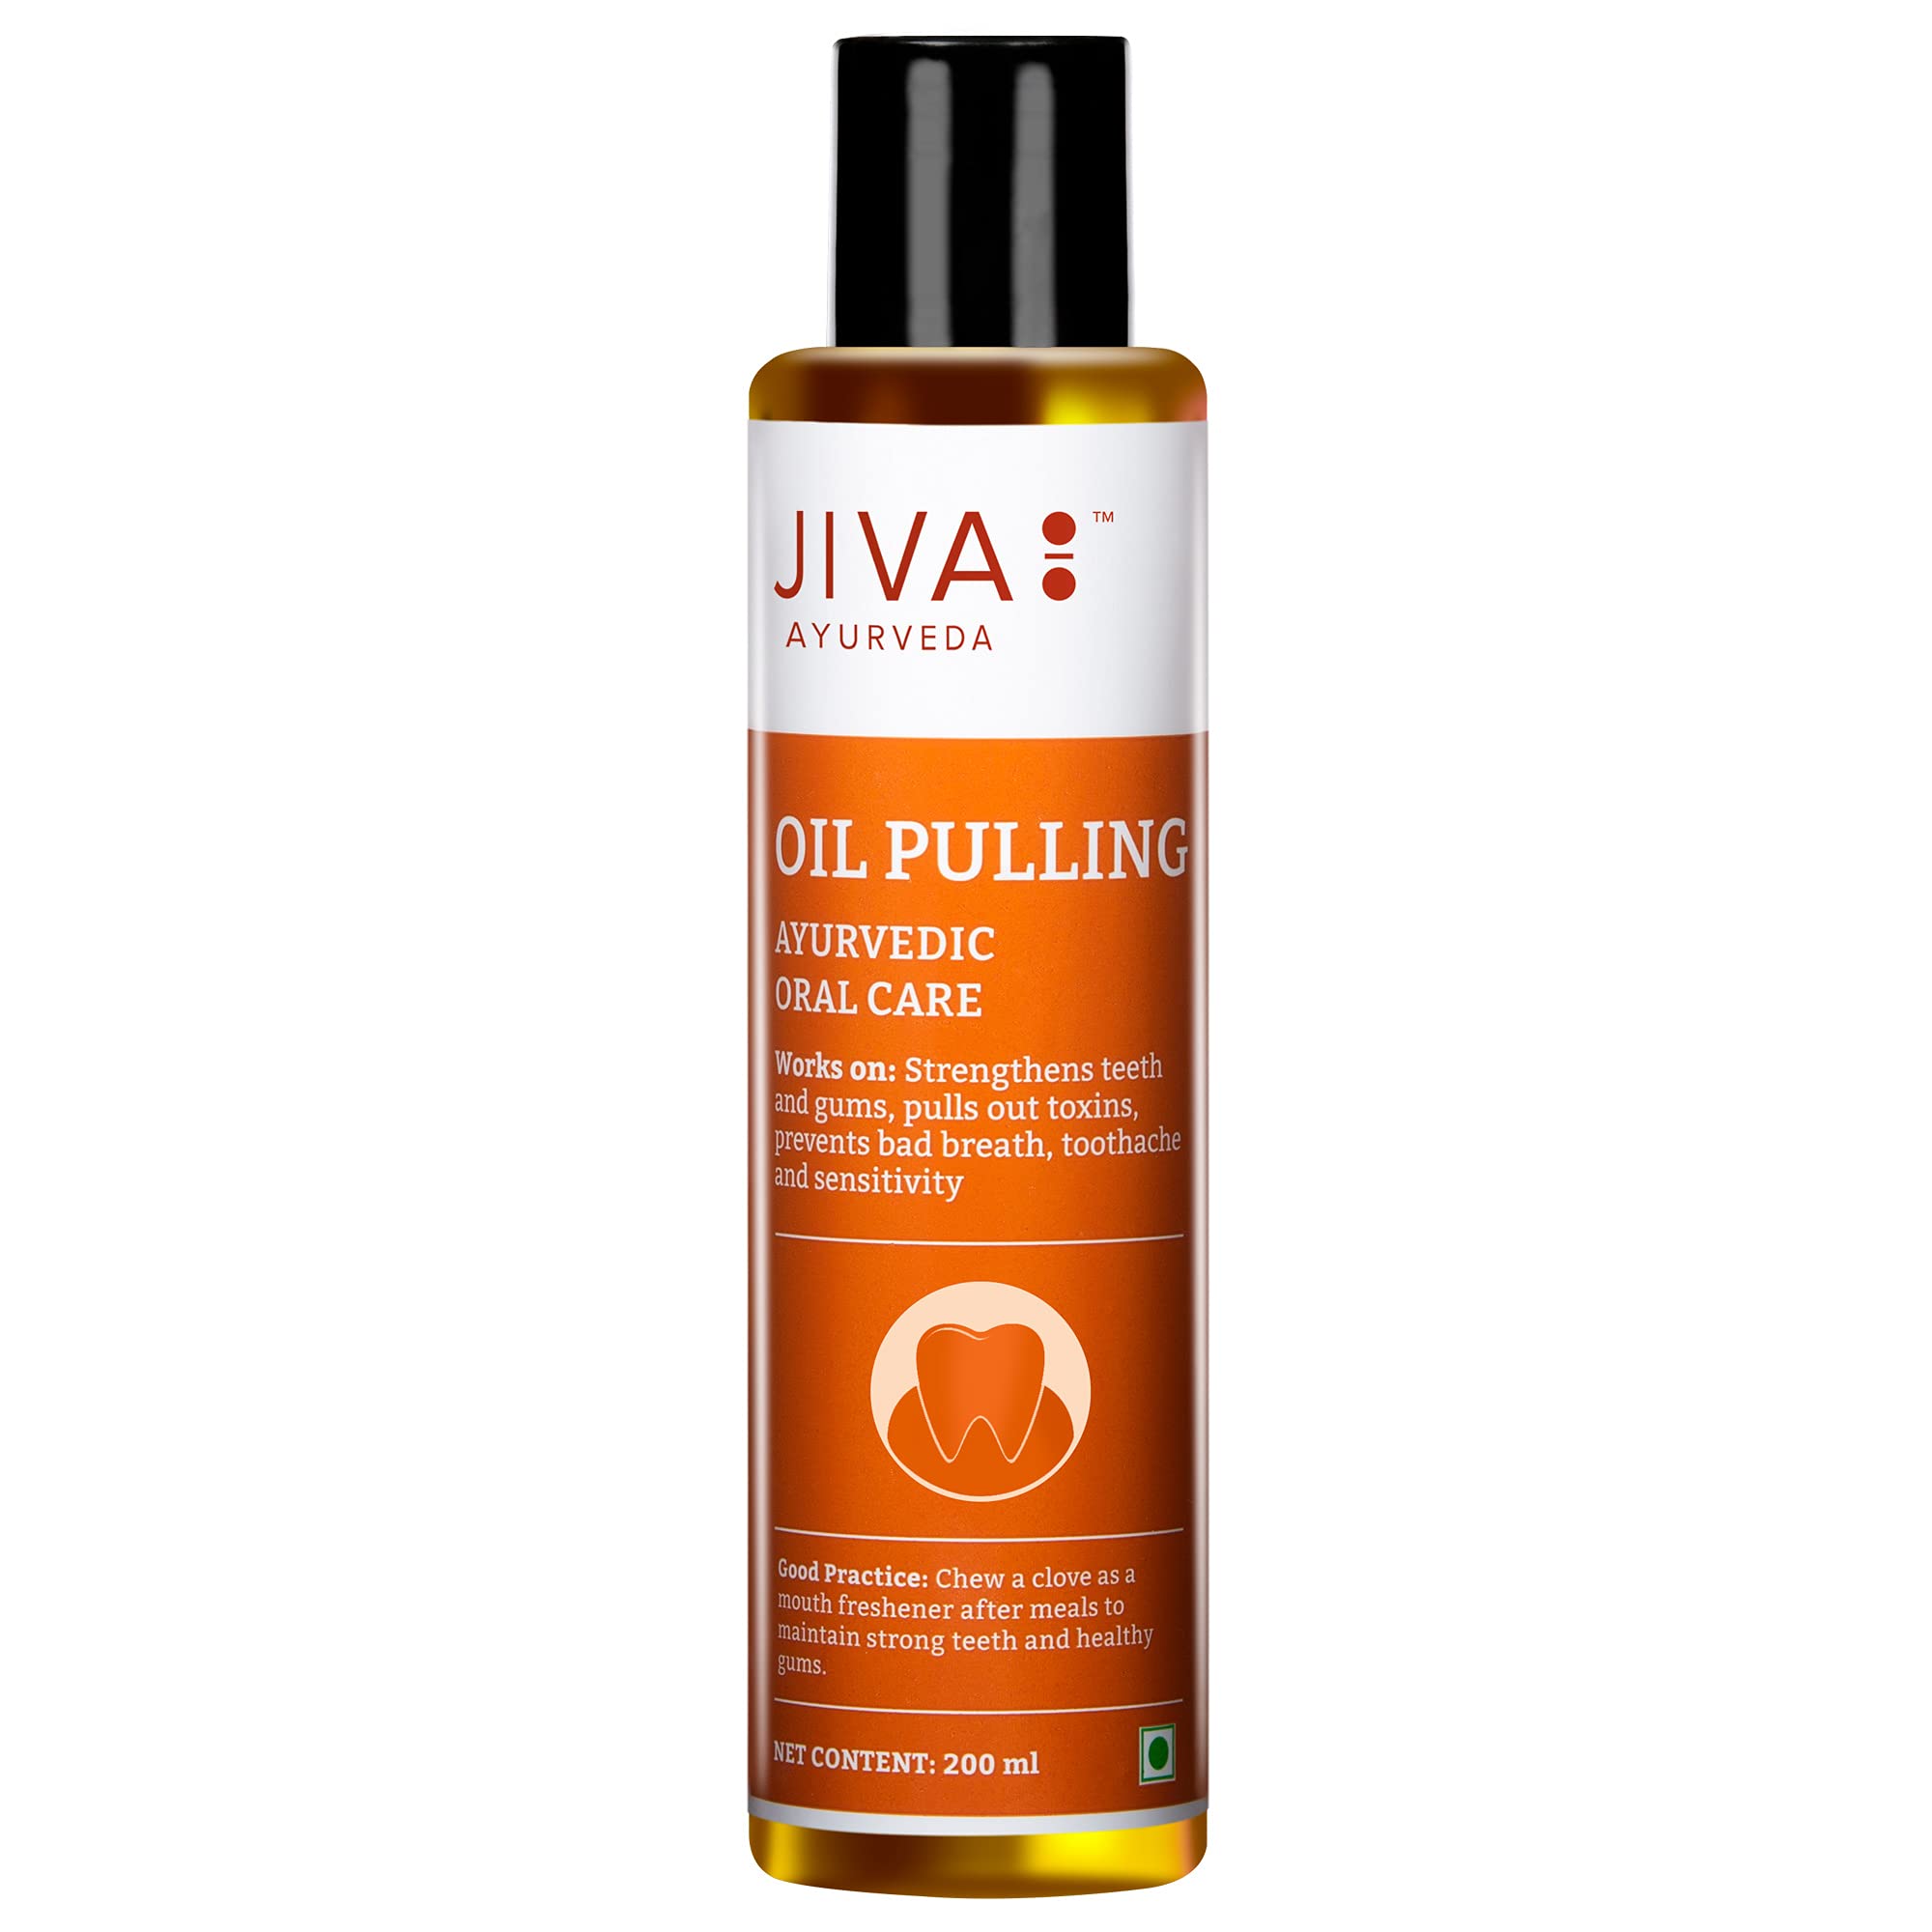 Jiva Oil Pulling | Ayurvedic Oral Care | Oral Care for Teeth and Gums - 200 ml, Pack of 1